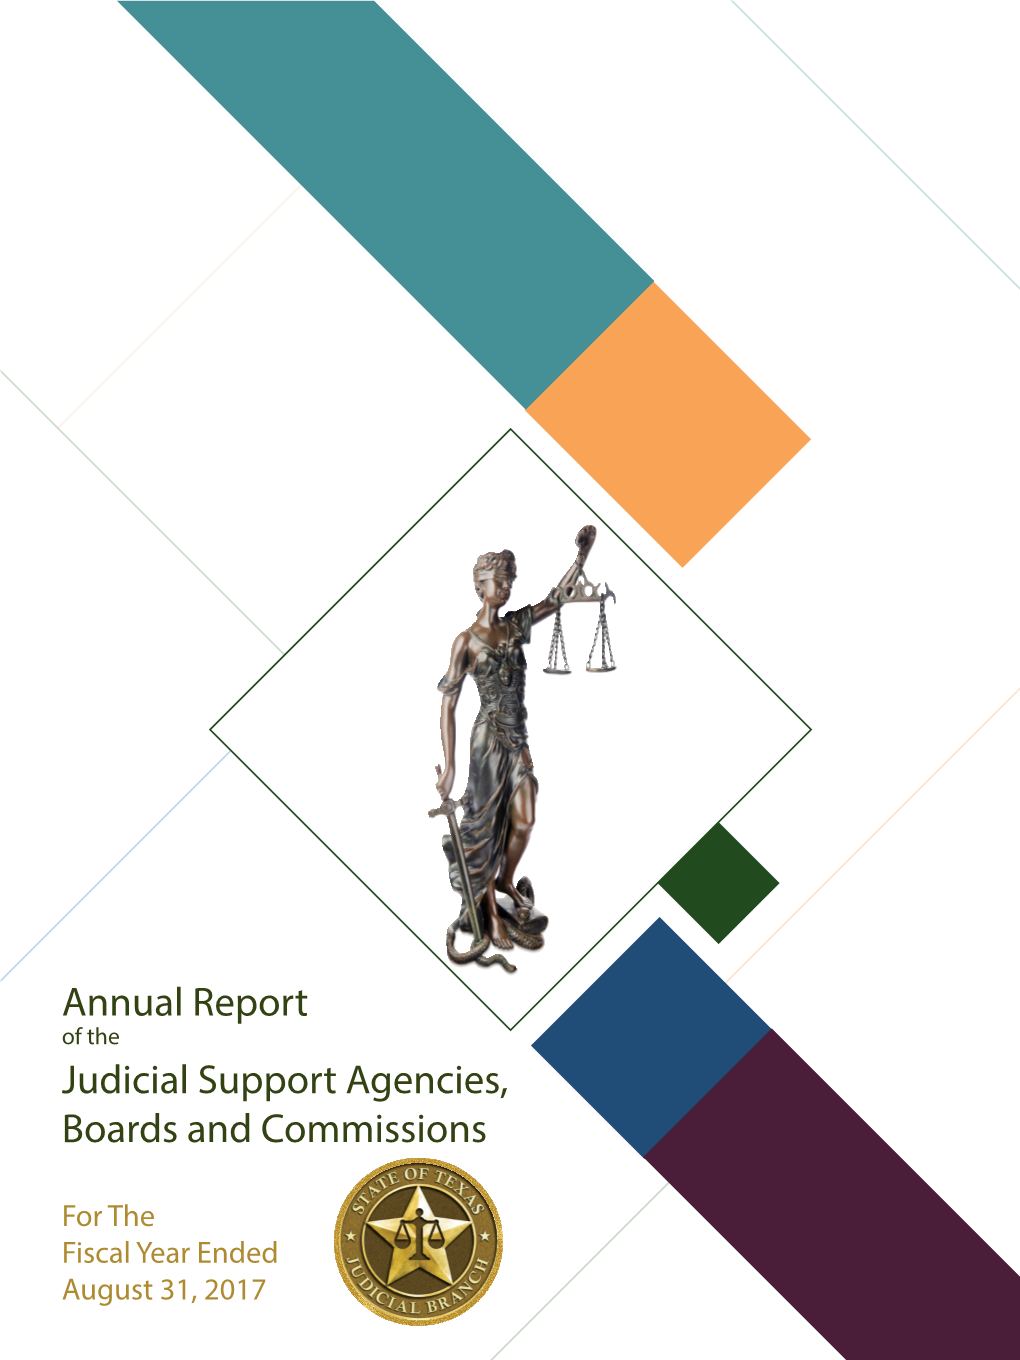 Annual Report Judicial Support Agencies, Boards and Commissions